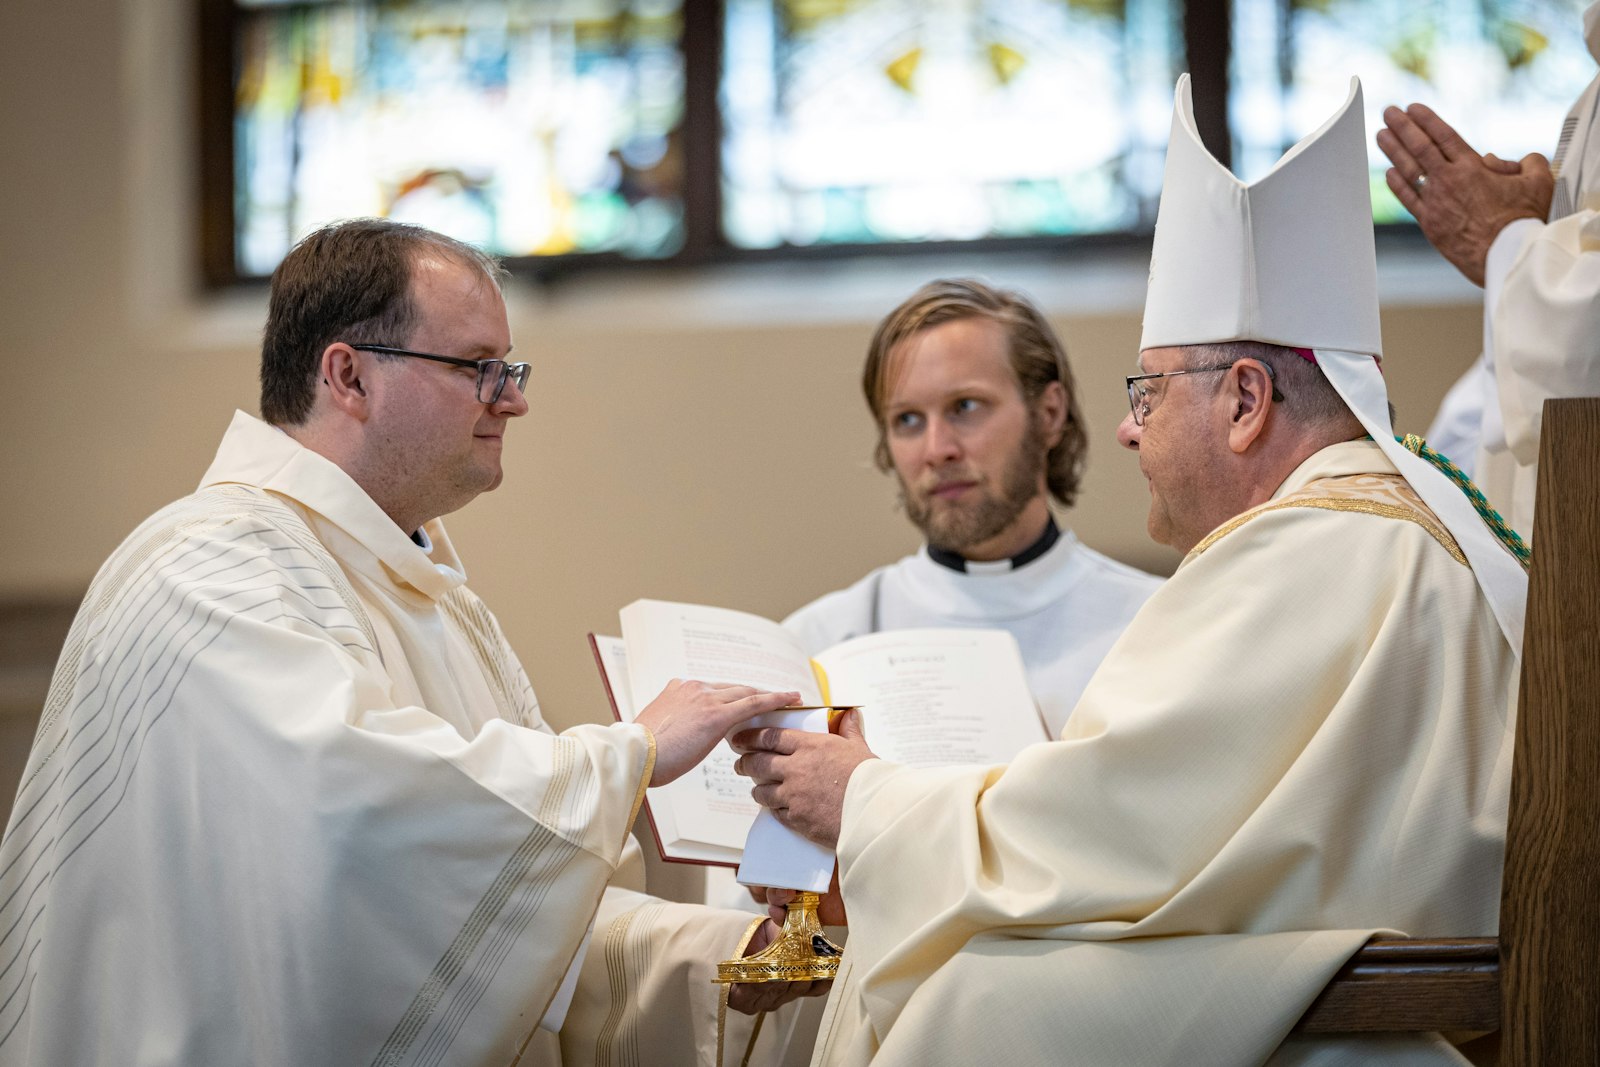 Fr. Daniel J. Kennedy kneels before Cleveland Bishop Edward C. Malesic during the Rite of Ordination on June 10 at the Church of the Gesu in Milwaukee. (Steve Donisch | Special to Detroit Catholic)